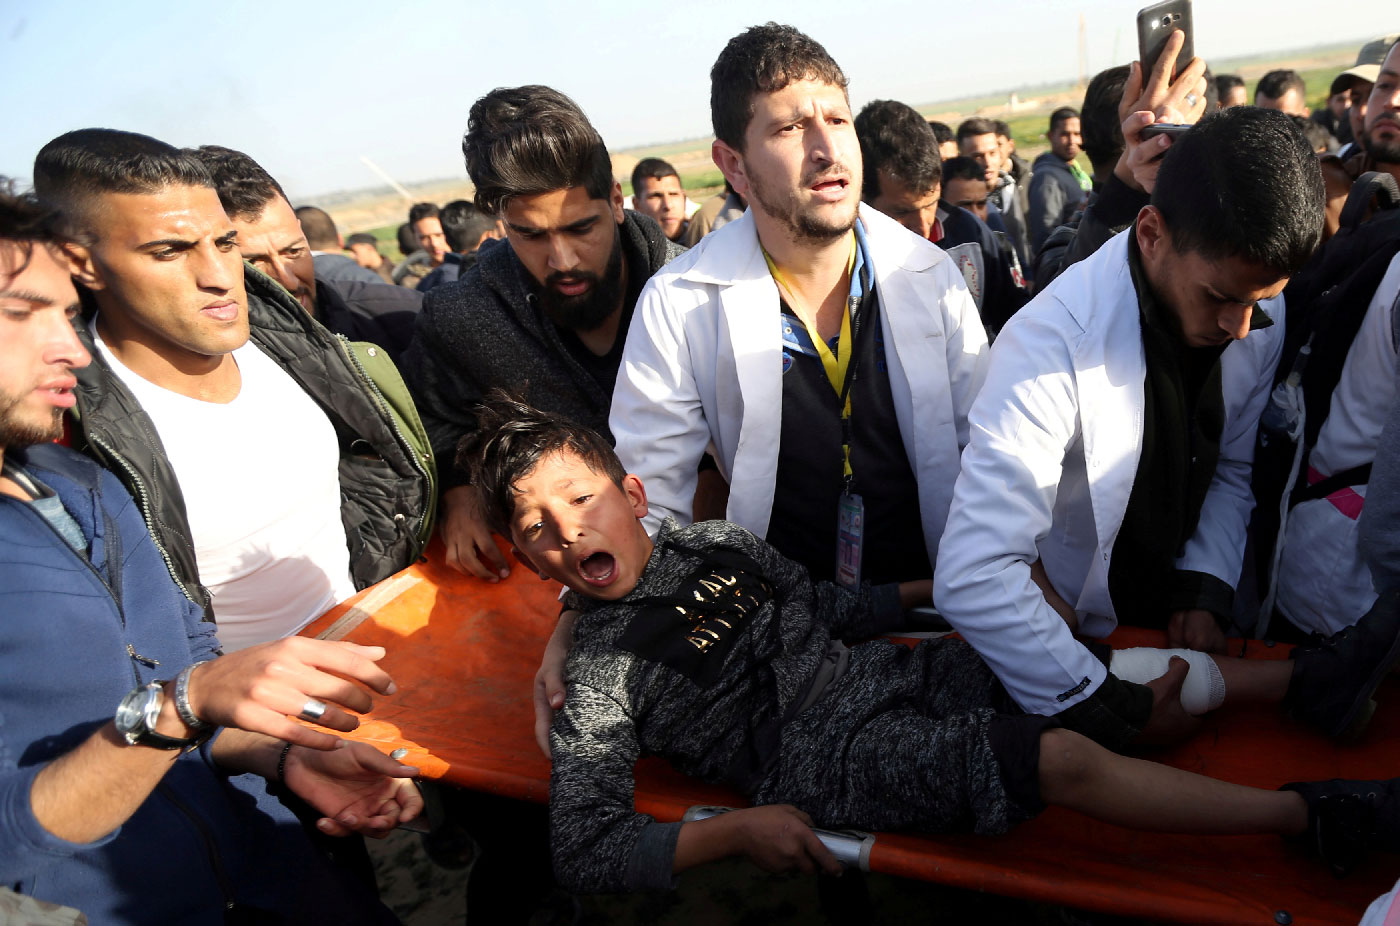 A wounded Palestinian boy reacts as he is evacuated during a protest at the Israel-Gaza fence, in the southern Gaza Strip January 25, 2019. 